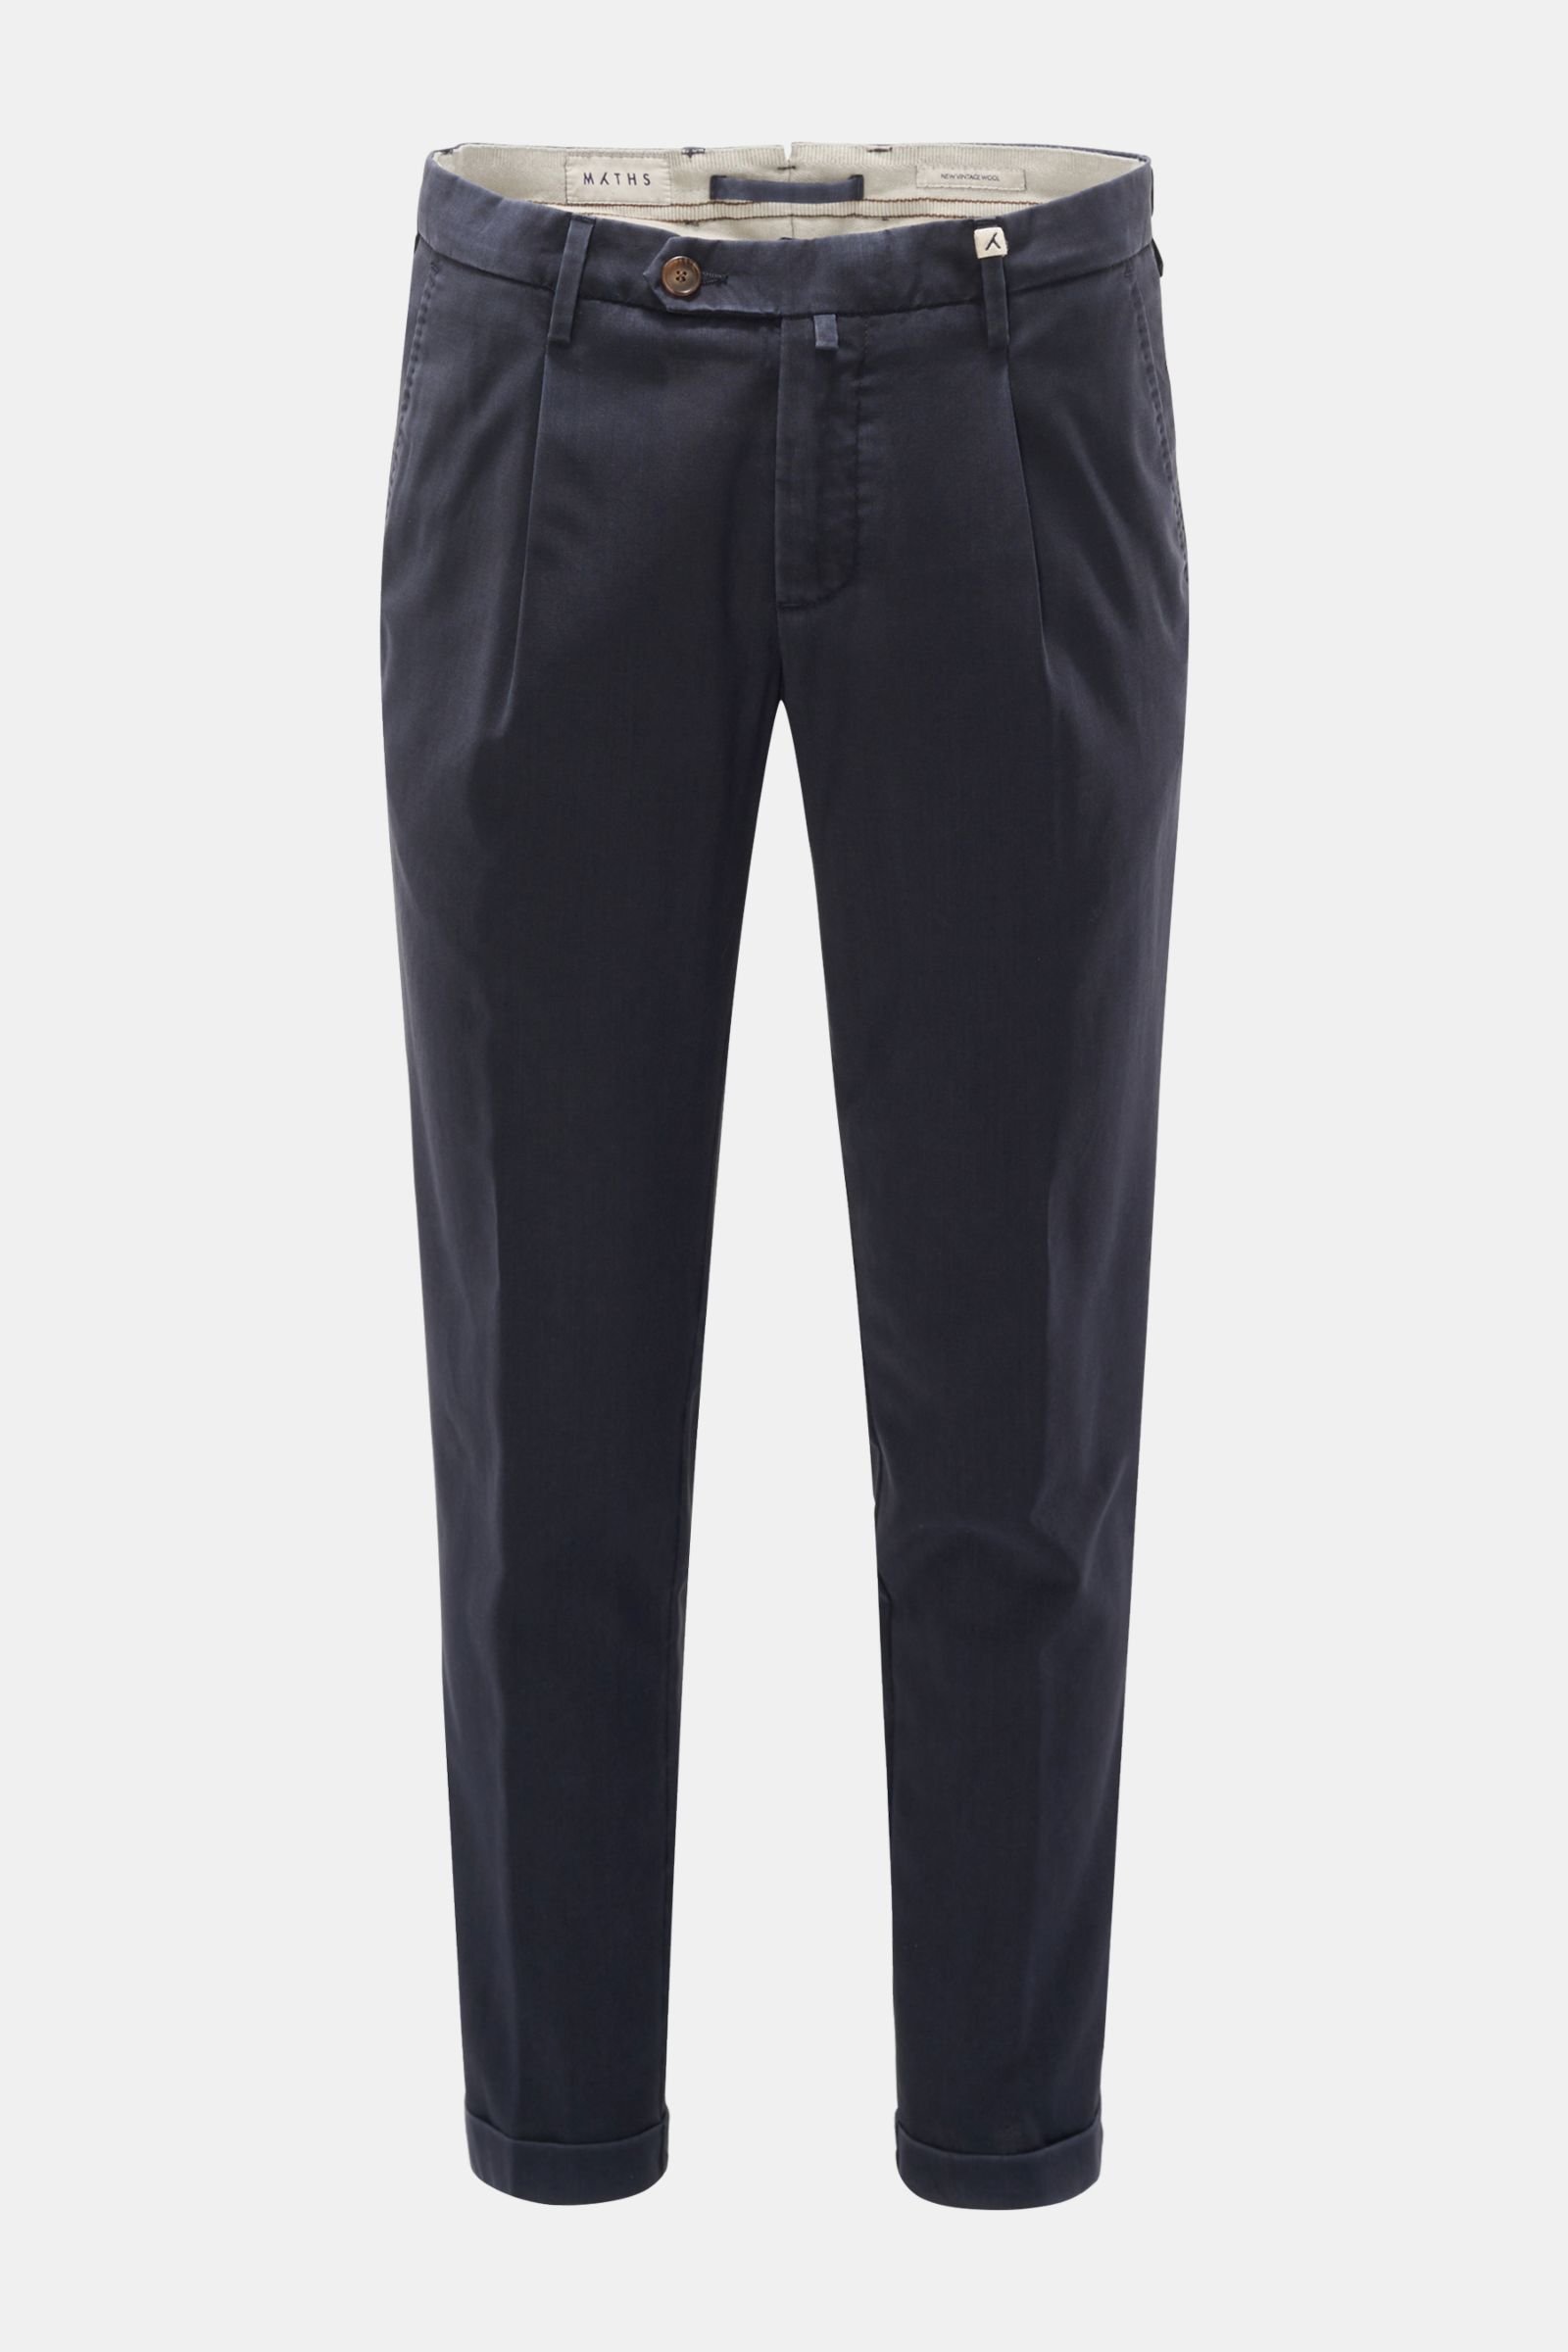 Wool trousers navy